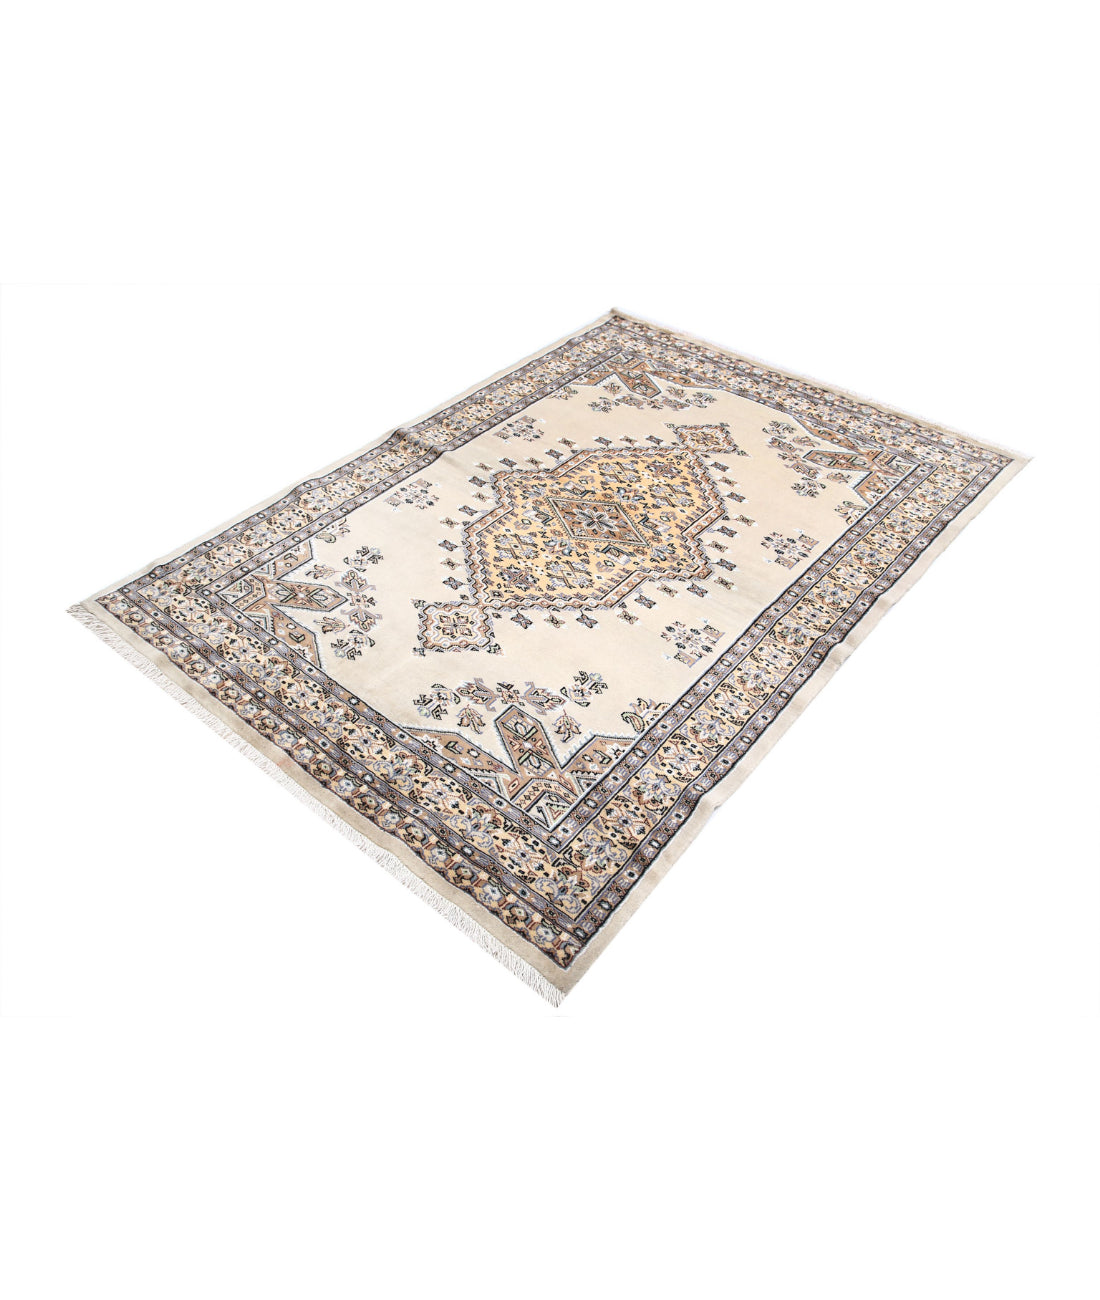 Hand Knotted Tribal Jaldar Fine Wool & Silk Rug - 4'6'' x 6'4'' 4'6'' x 6'4'' (135 X 190) / Ivory / Gold